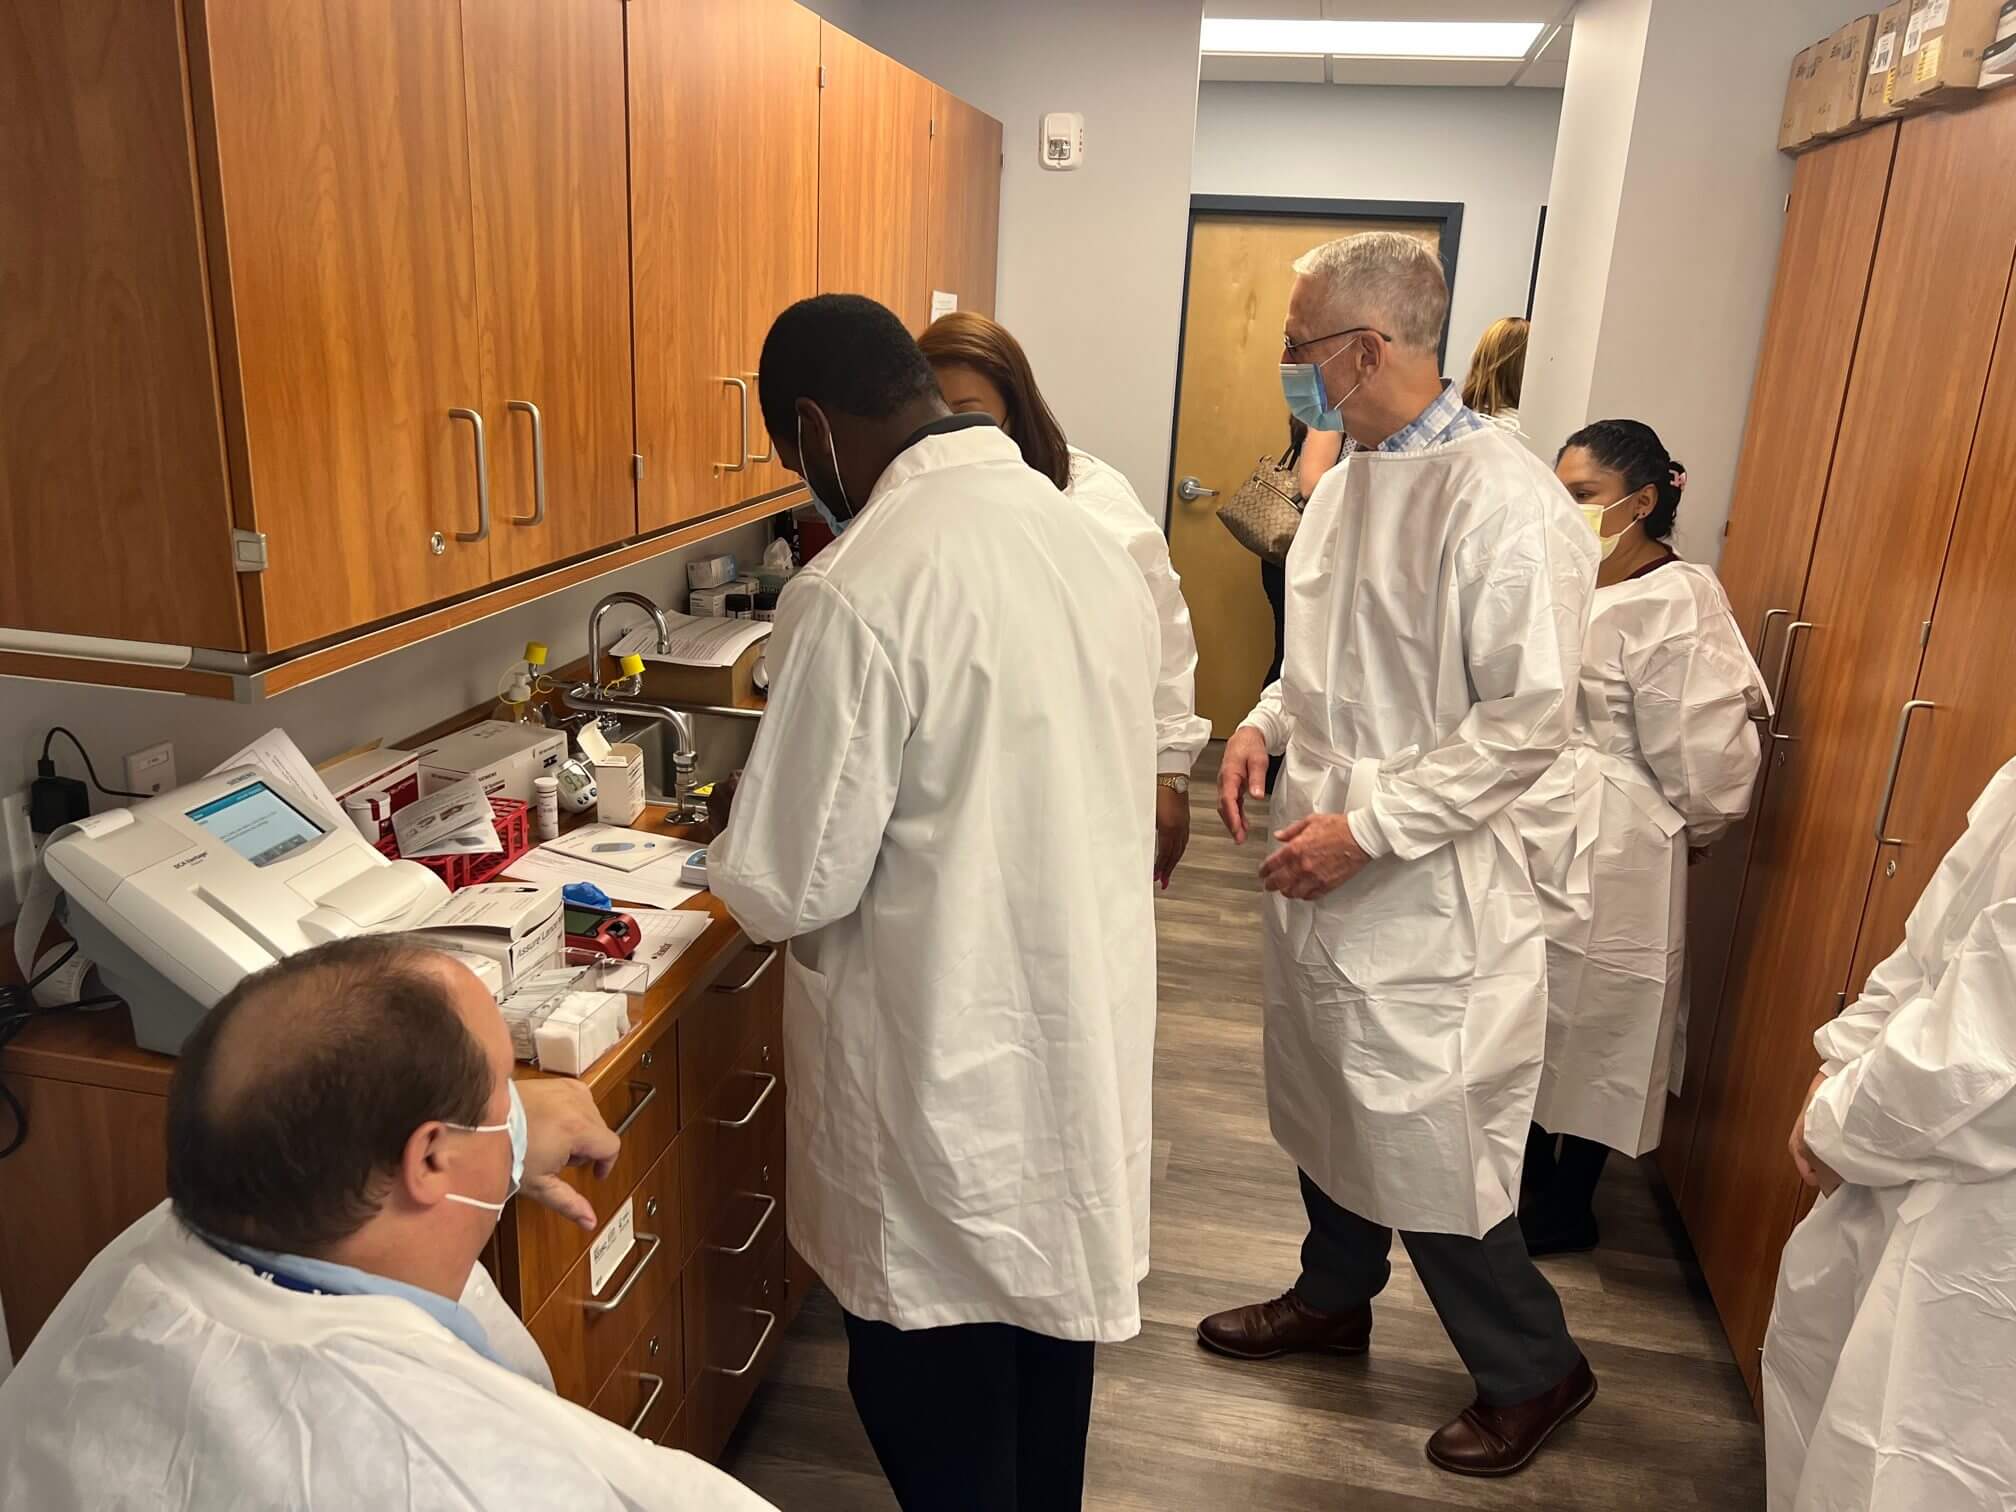 BD, Heart to Heart International, NAFC and Henry Schein Cares Award Critical Lab Equipment to Six U.S. Free and Charitable Clinics